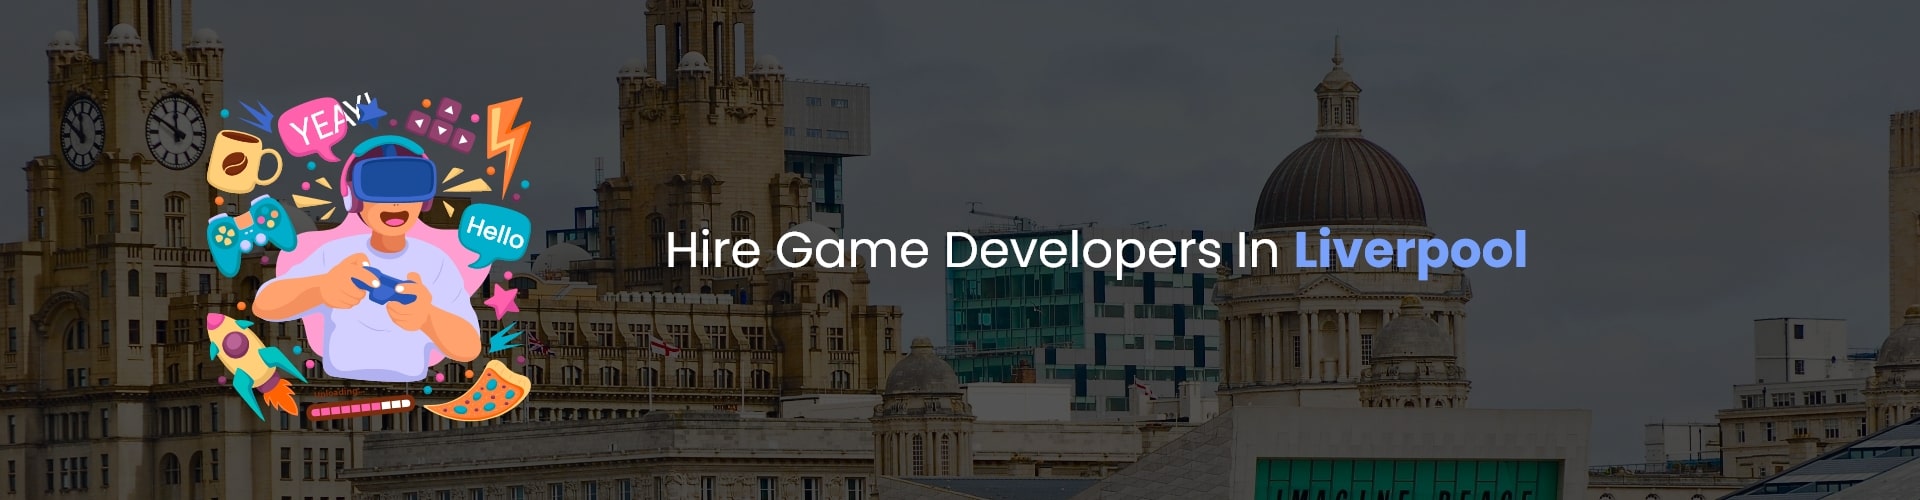 hire game developers in liverpool